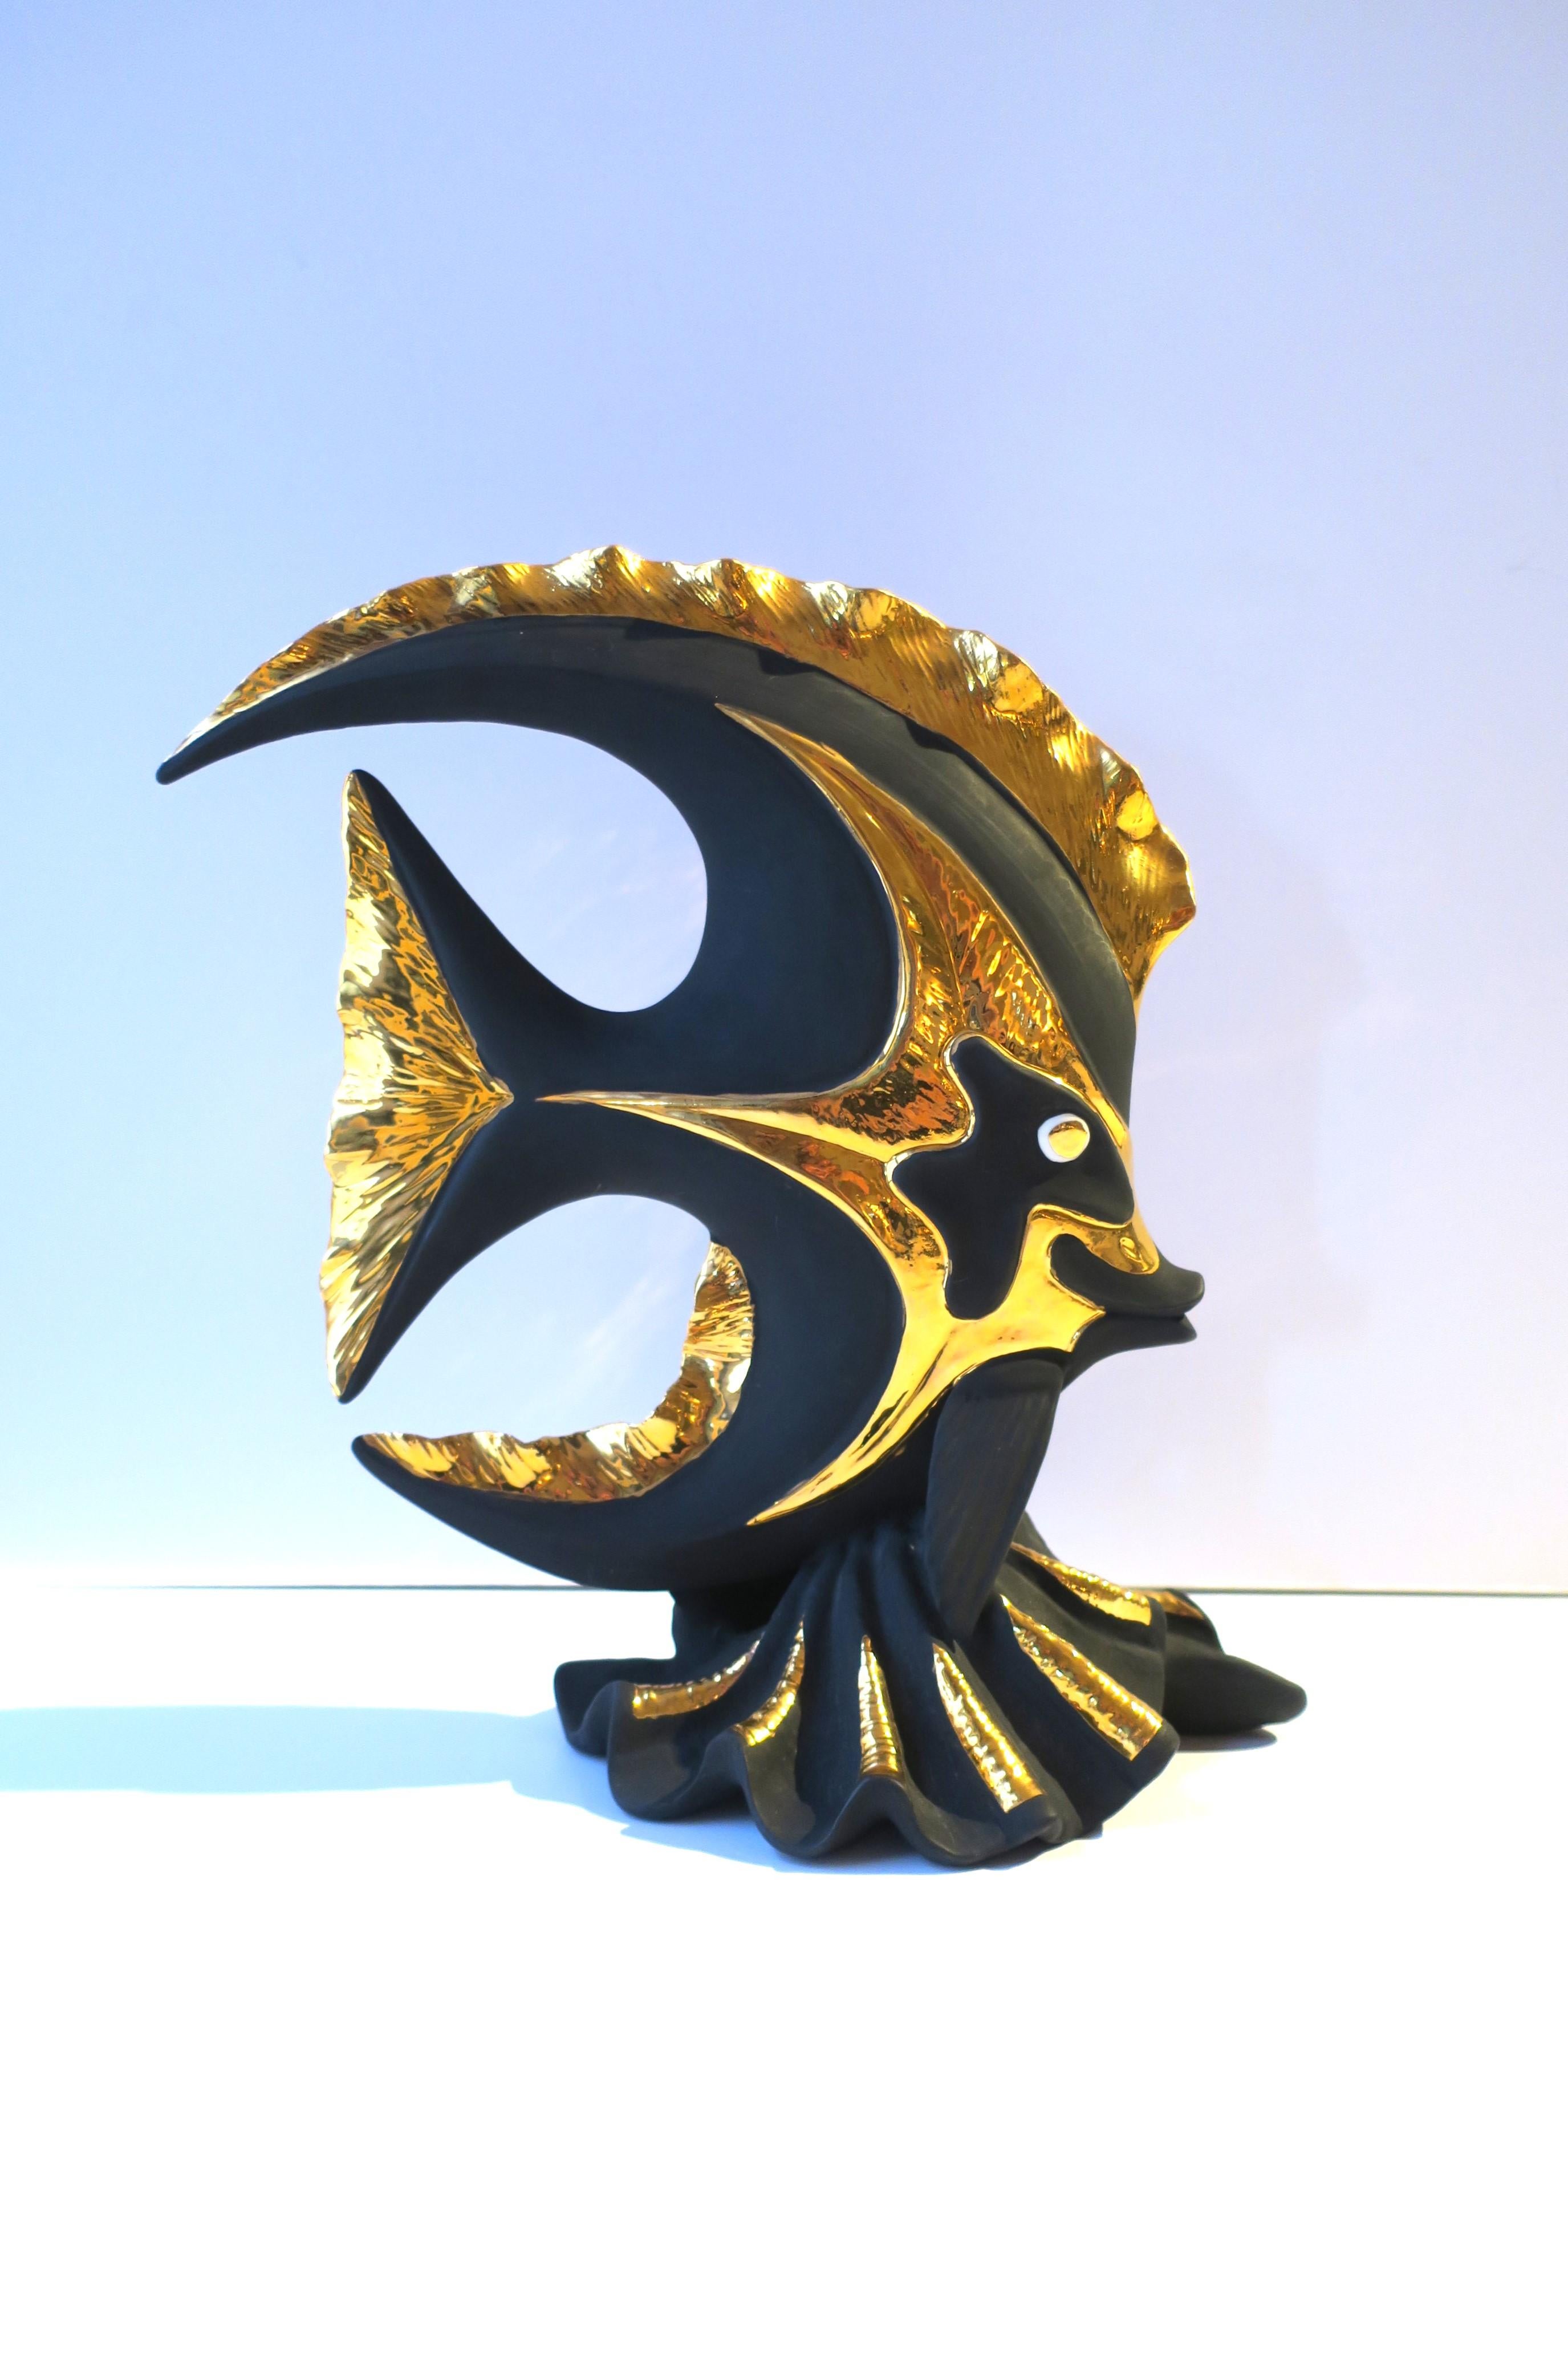 A detailed Italian black basalt porcelain and gold tropical fish sculpture hand-made by S. Puccini, circa late-20th century, Italy. A hand-made piece of matte black porcelain and shiny bright gold enamel, making a beautiful and striking combination